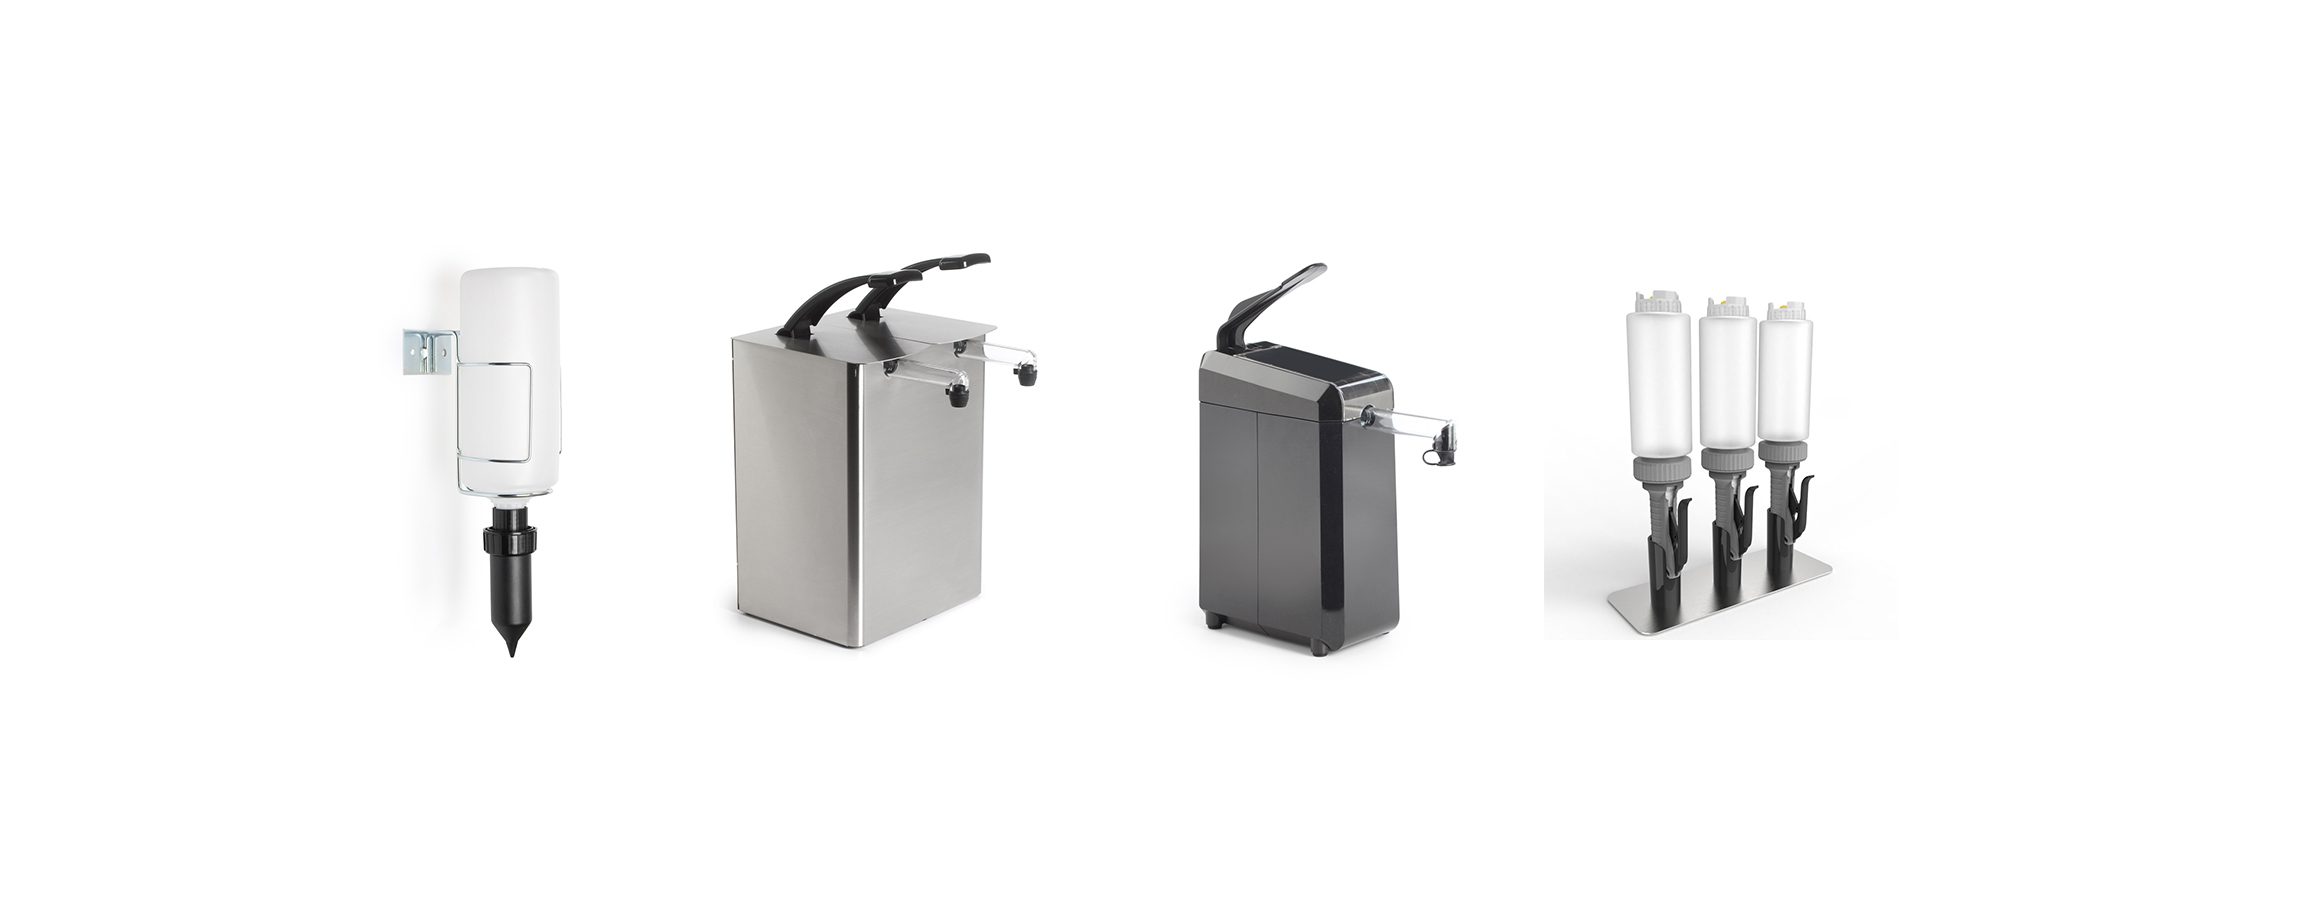 ASEPT Standard Dispensers and pump Collection